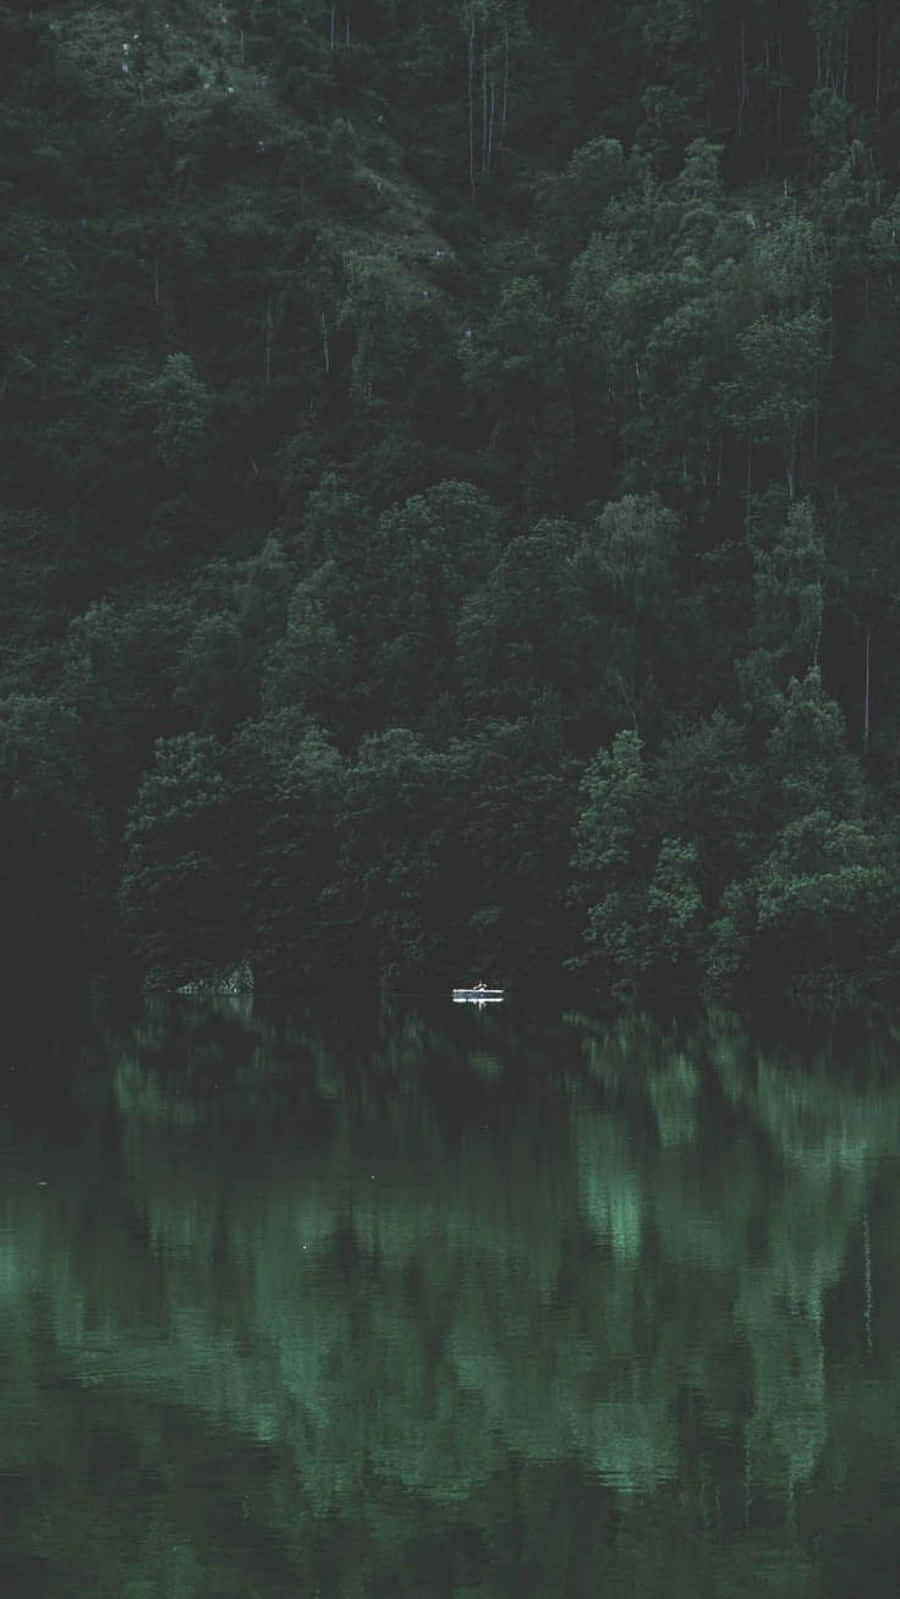 Calm iPhone 11 Wallpapers  Wallpaper Cave